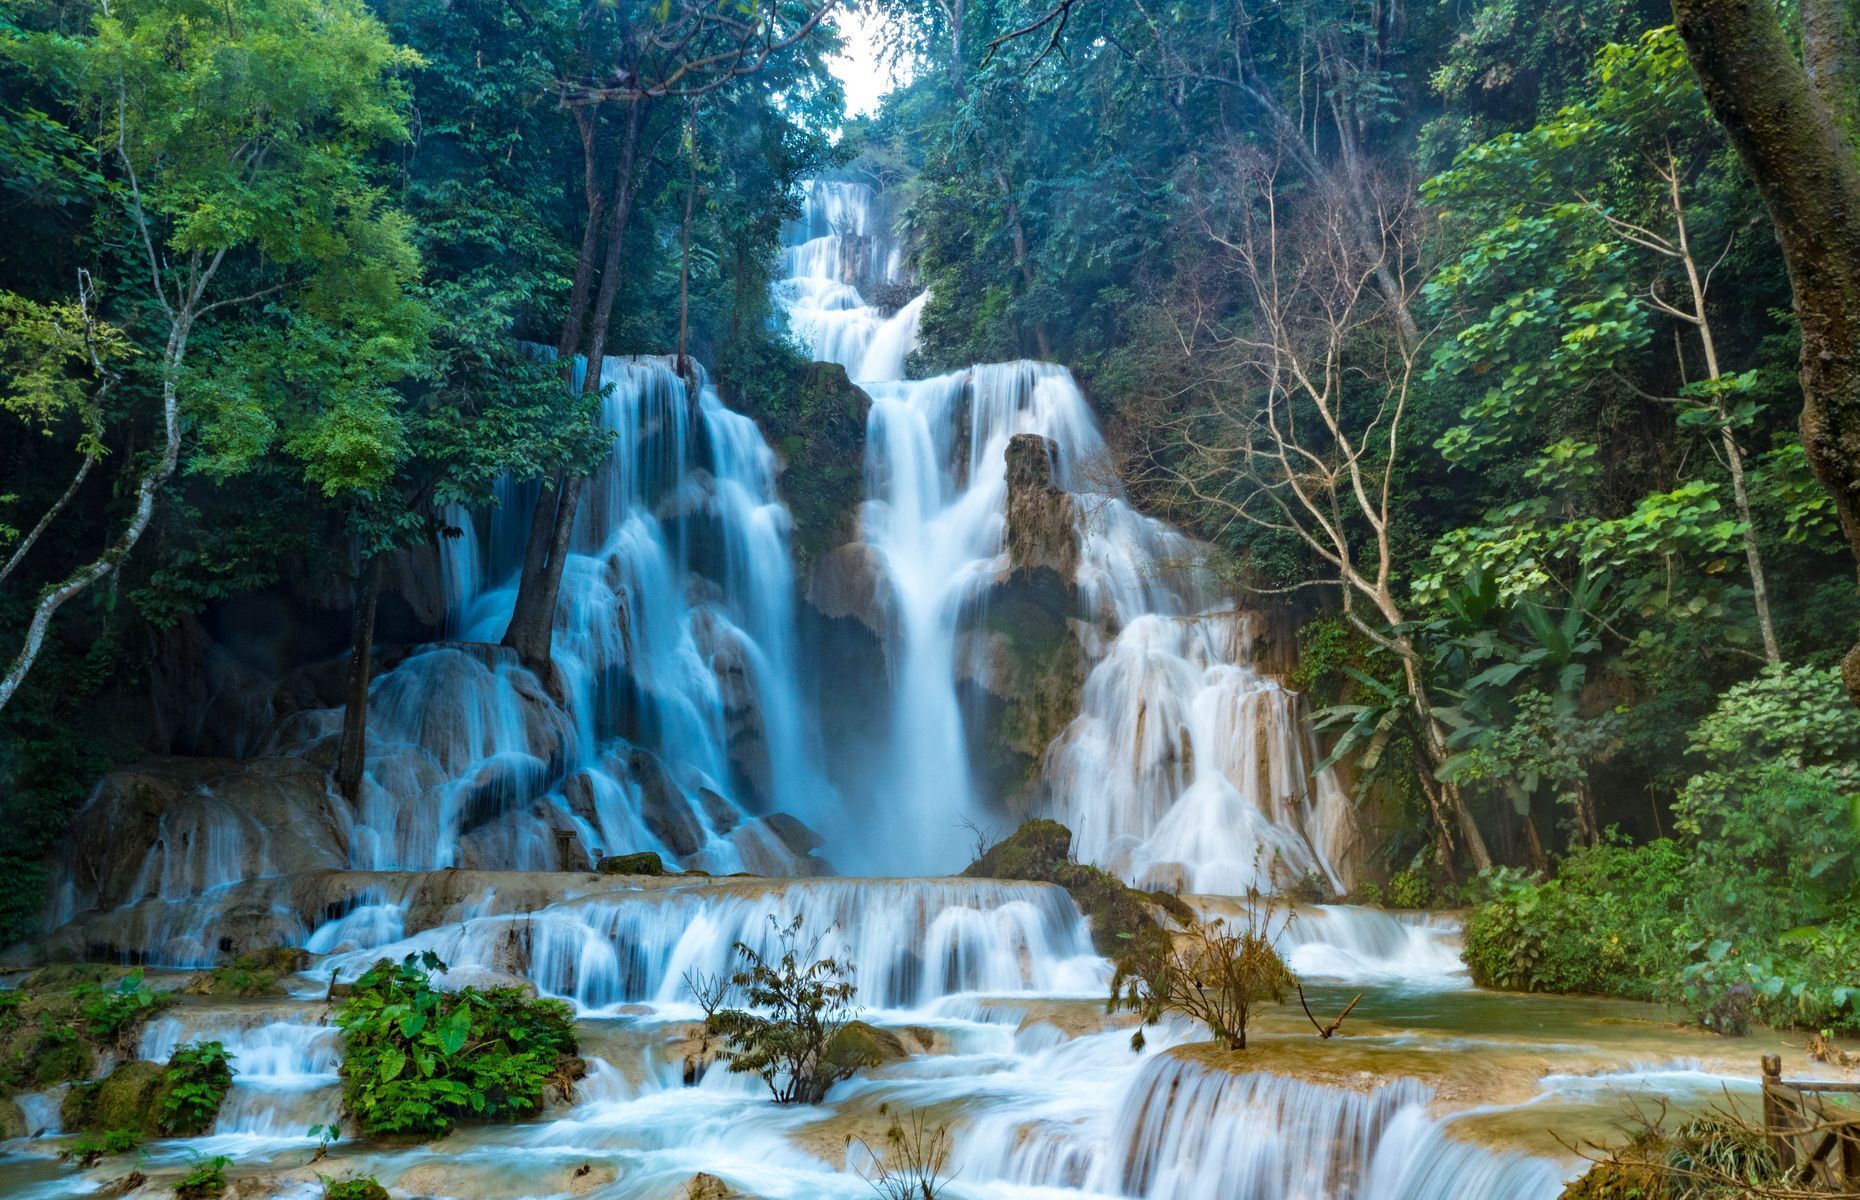 <p>Near Luang Prabang in Laos, you’ll find the dazzling <a href="https://laostravel.com/kuang-si-waterfalls-luang-prabang/" class="atom_link atom_valid" rel="noreferrer noopener">Kuang Si</a> waterfalls. Truly a natural wonder, their crystal-clear waters tumble into a series of turquoise basins, creating a breathtaking spectacle. Cool off on torrid days with a refreshing dip in these superb natural pools. The dry season, from November to April, is an excellent time to visit this magical place.</p>